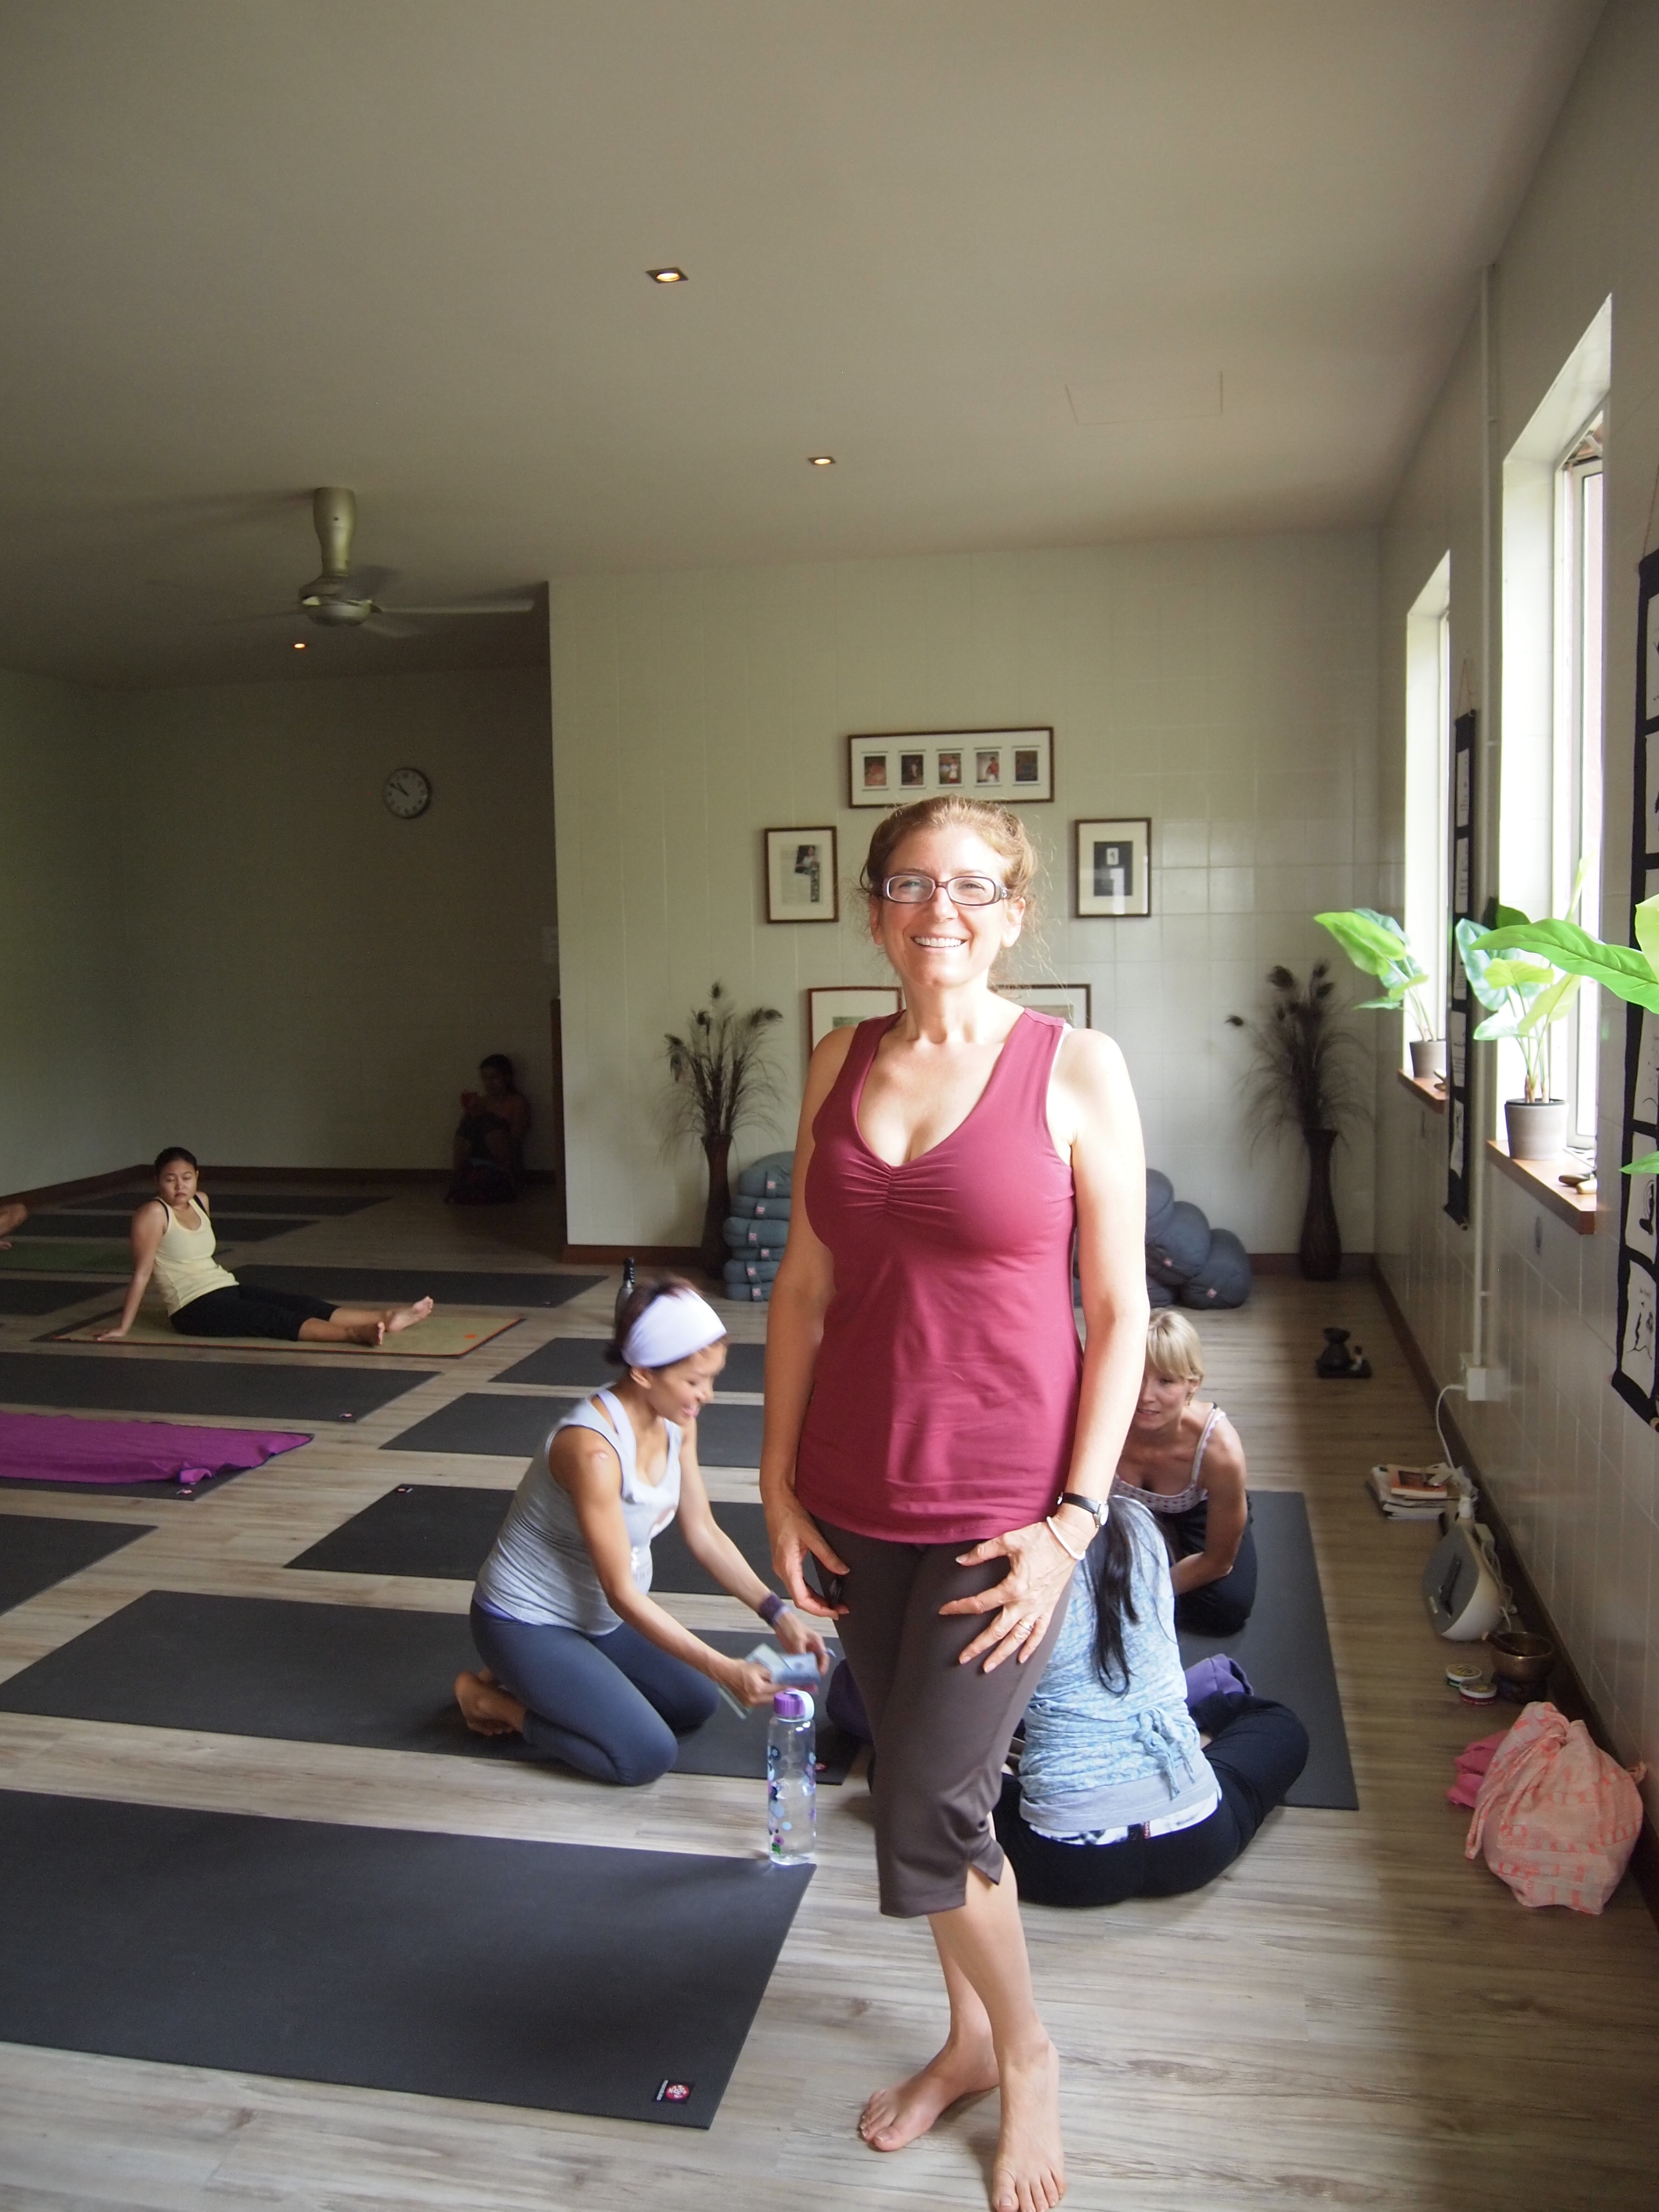 In Malaysia at Upward Yoga Studio in 2012. Even vacation over seas did not stop me from my practice. I was blessed to have Ninie Ahmad lead the class.